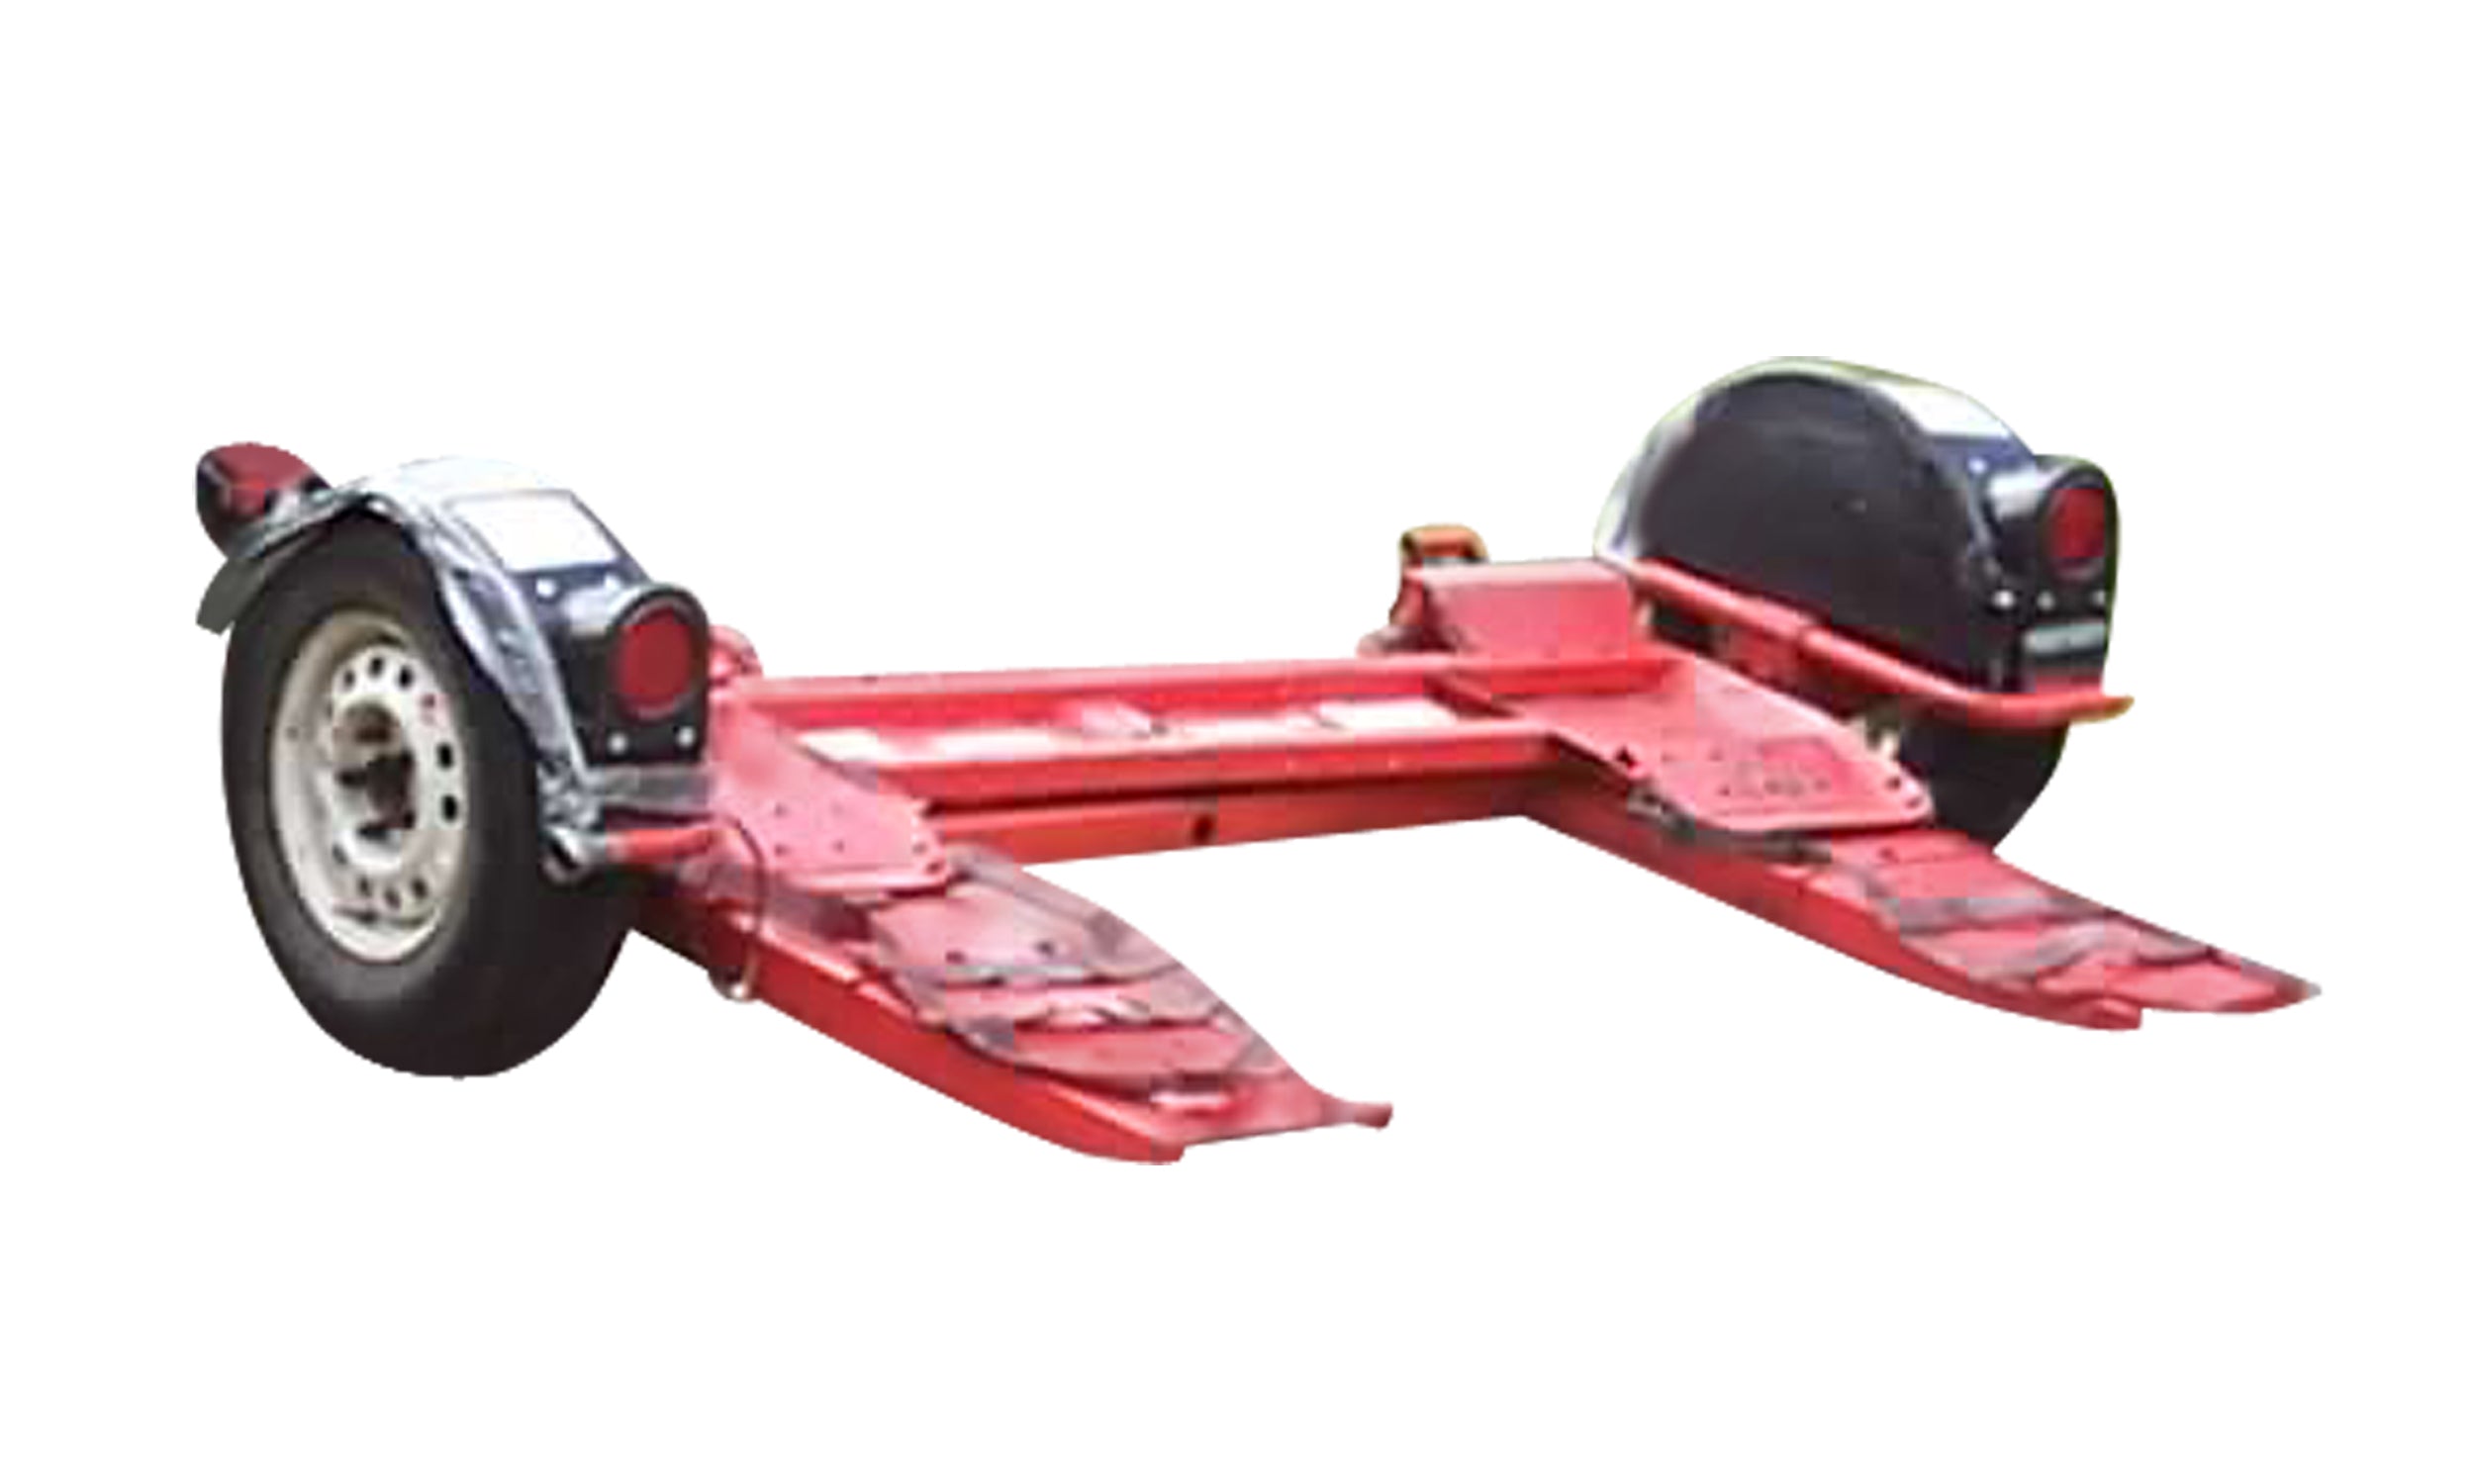 Car Tow Dolly Plans Build Guide, Step By Step Procedures, PDF CD *Nice &  Easy*